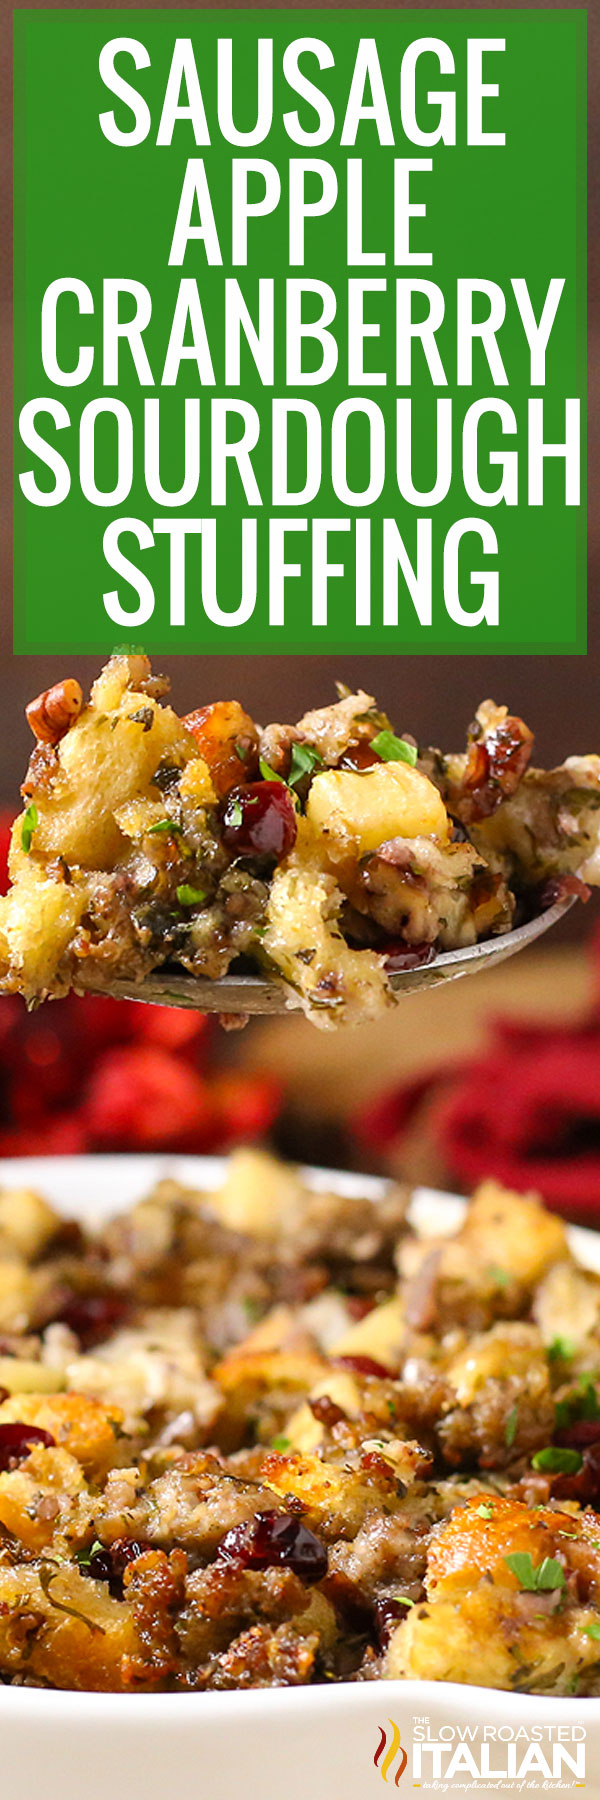 titled image (and shown): sausage apple cranberry stuffing recipe